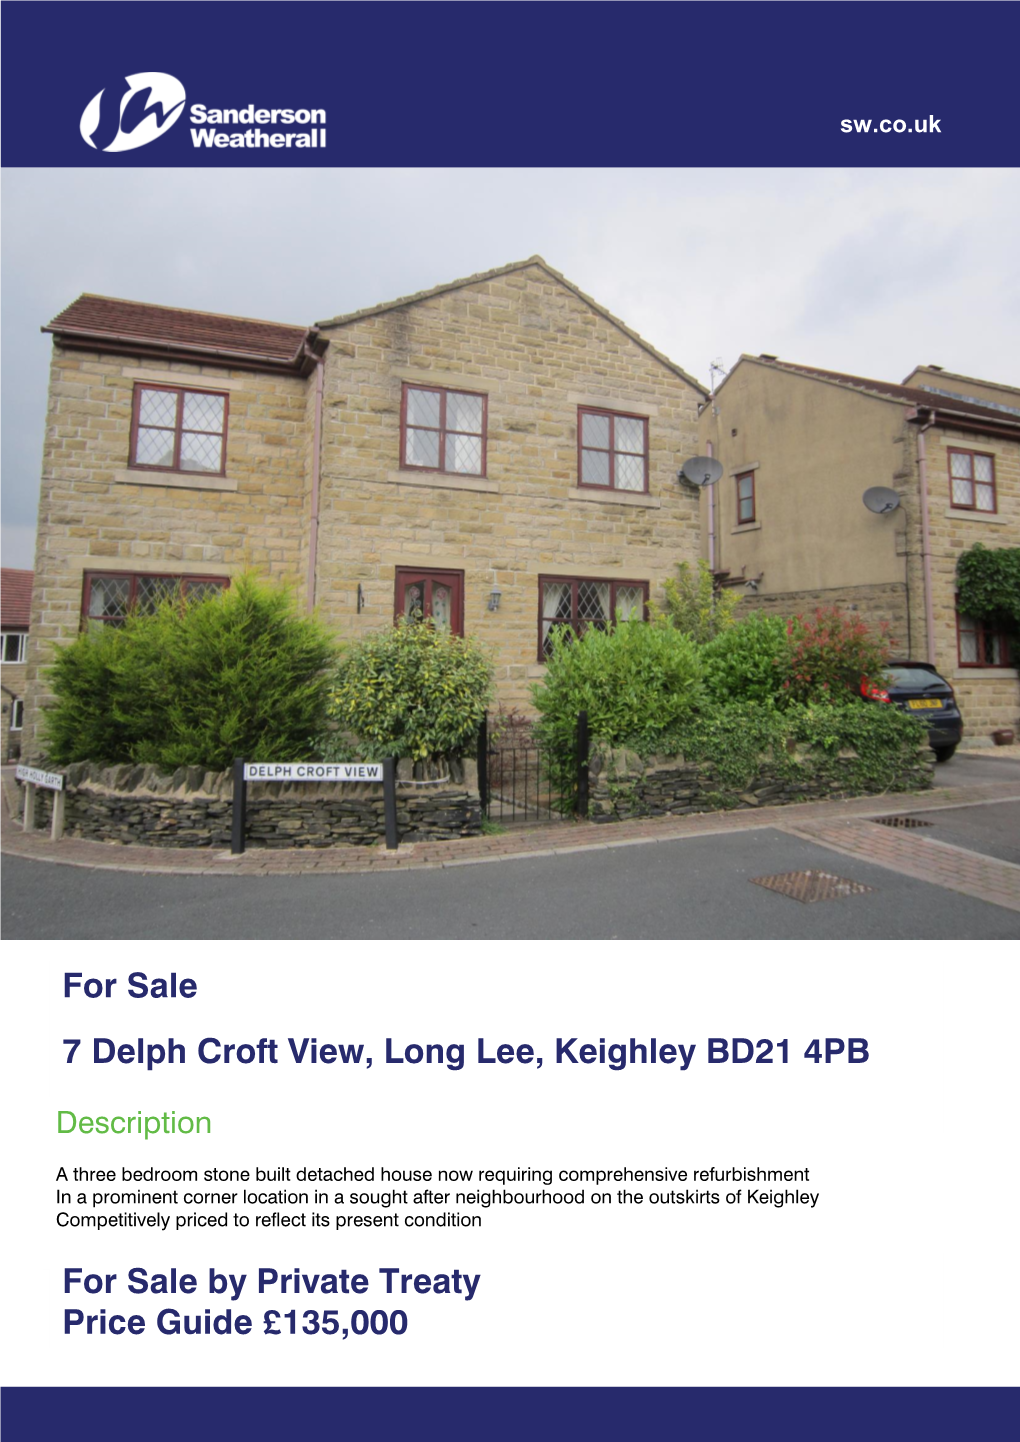 For Sale 7 Delph Croft View, Long Lee, Keighley BD21